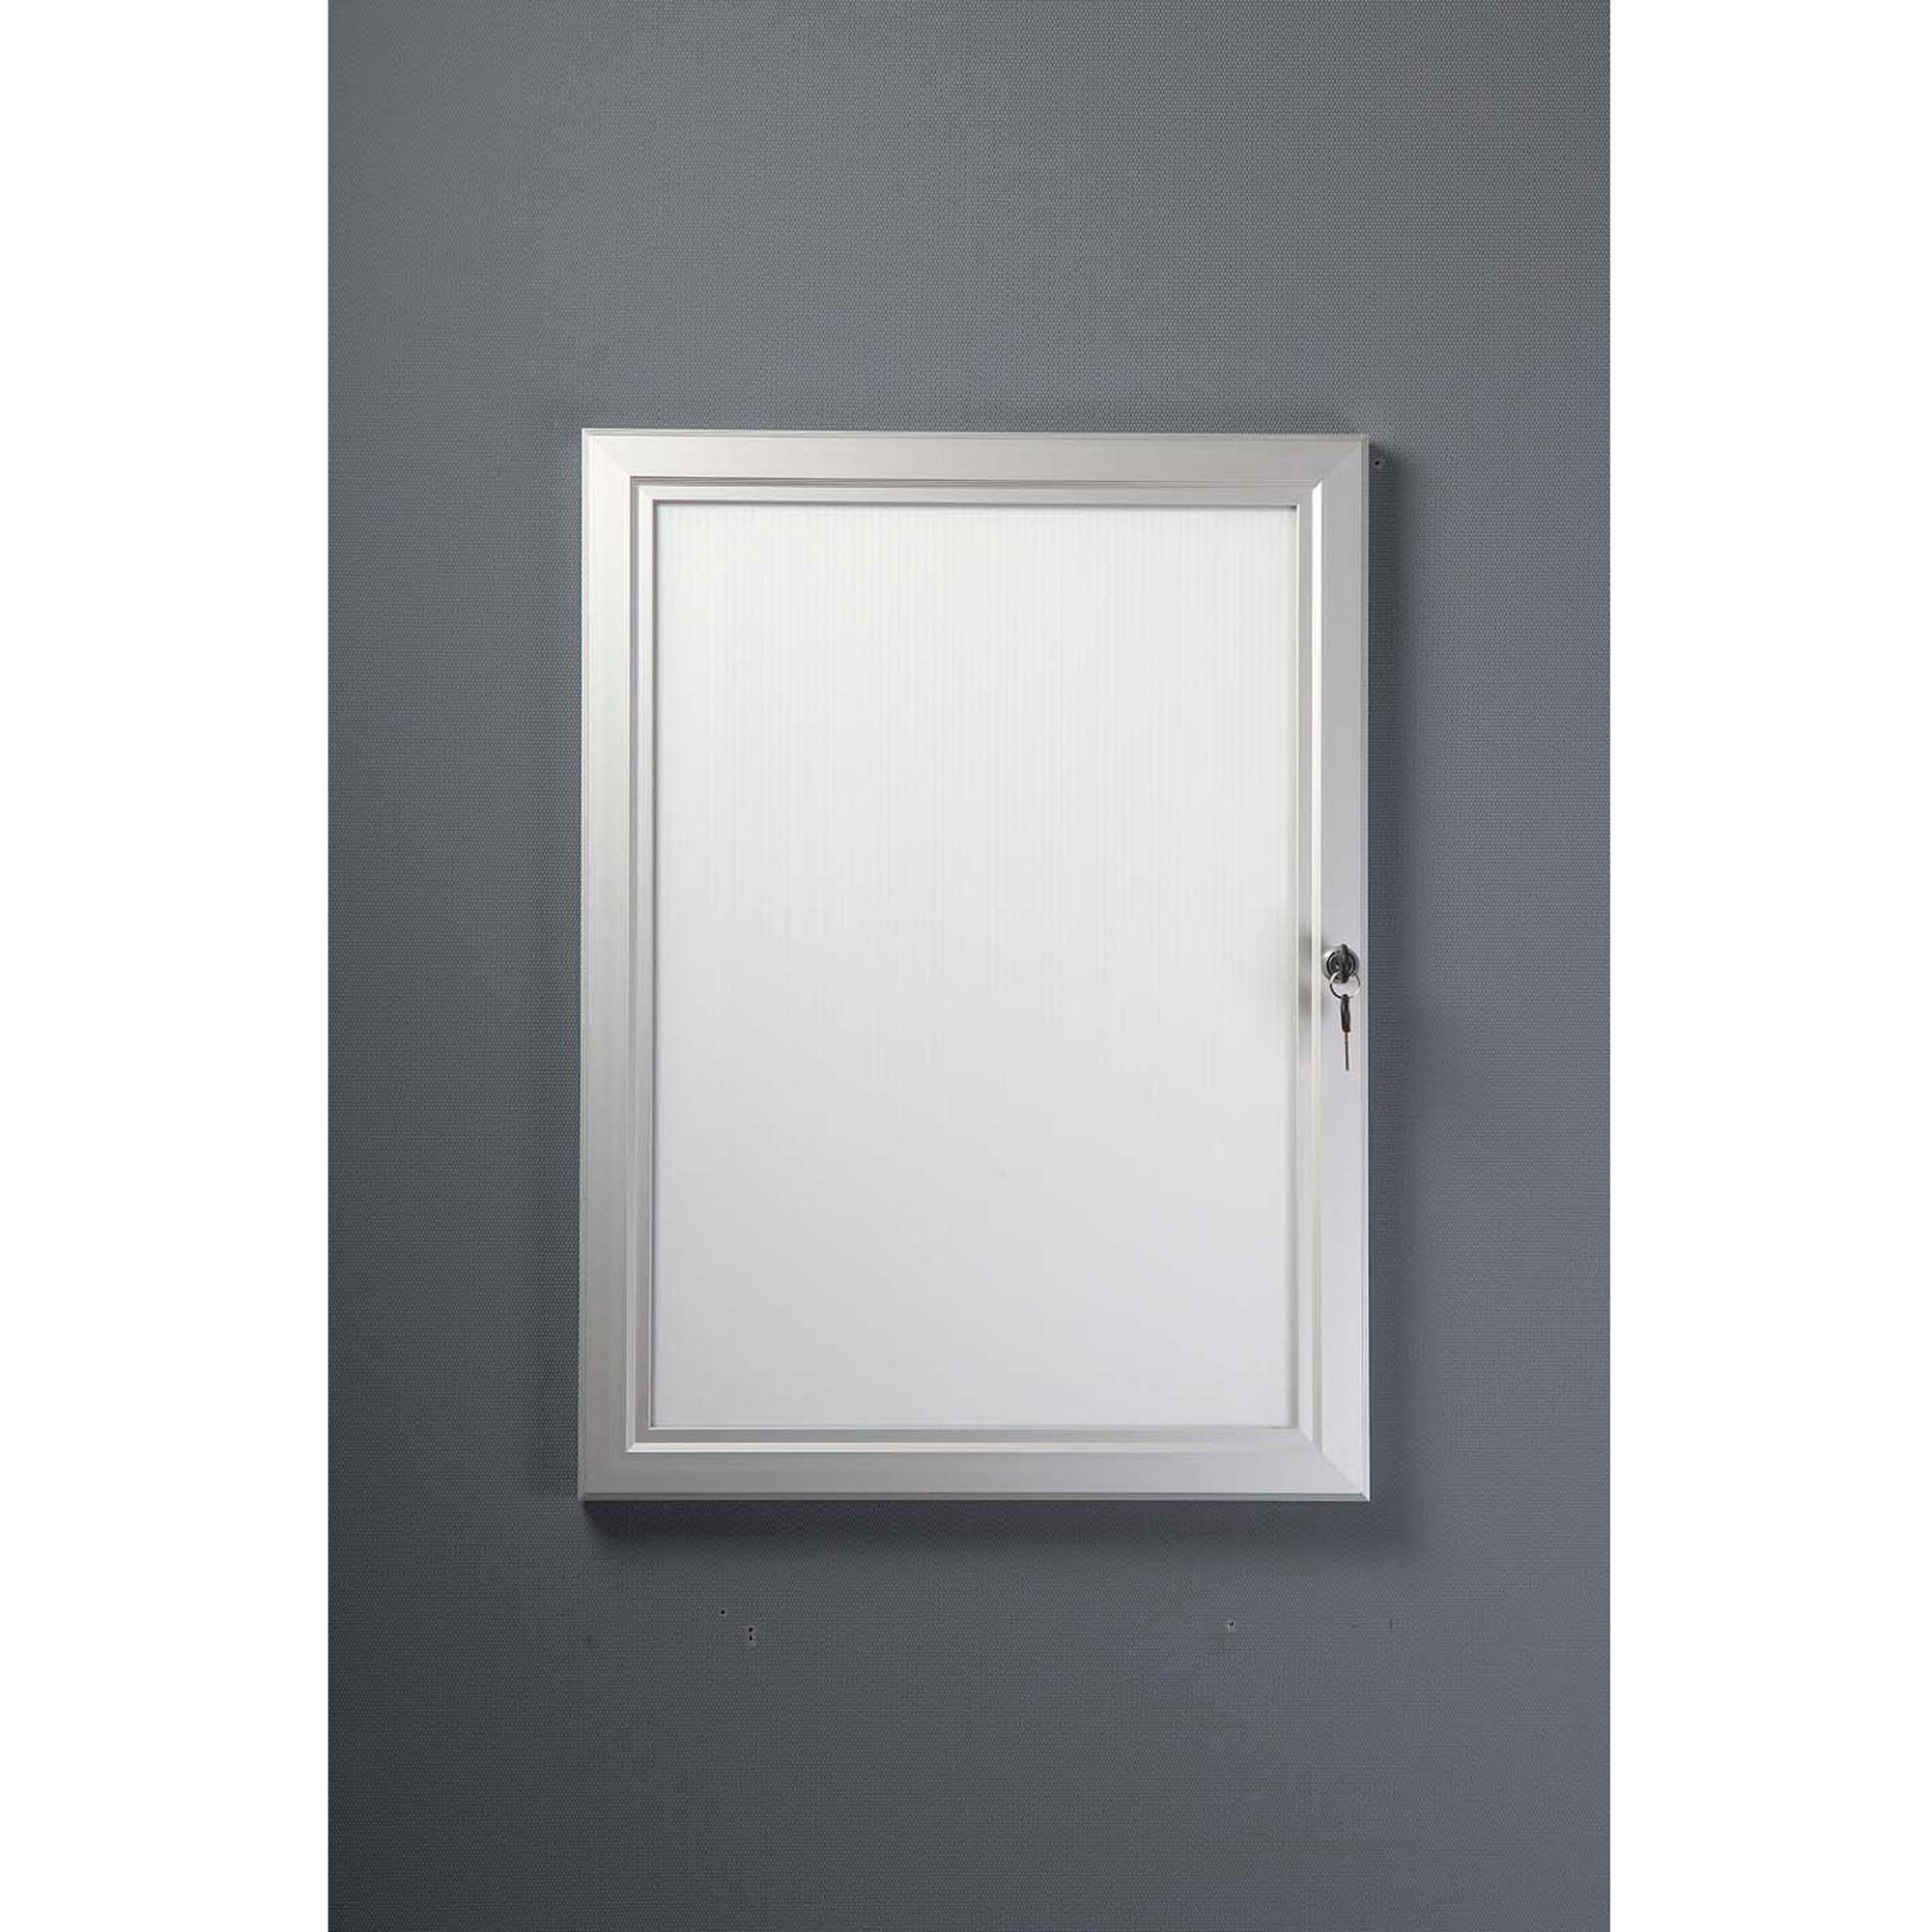 Seco Classic Snap Frame - 36 x 48 Frame Size - Rectangle - Black - 1 Each  - Aluminum - Silver